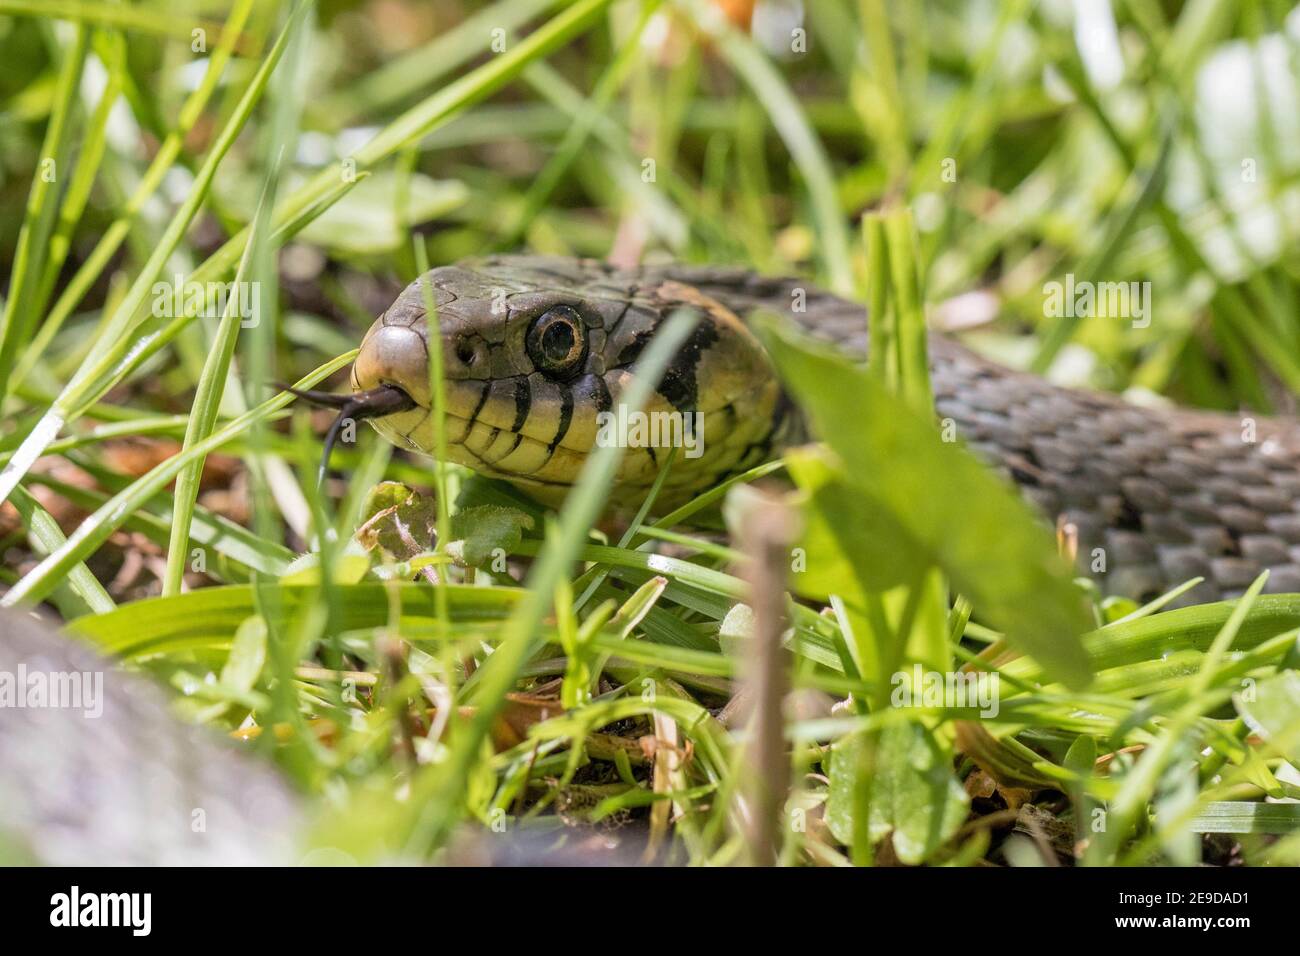 grass snake (Natrix natrix), darting its tongue in and out, portrait, Germany, Bavaria Stock Photo